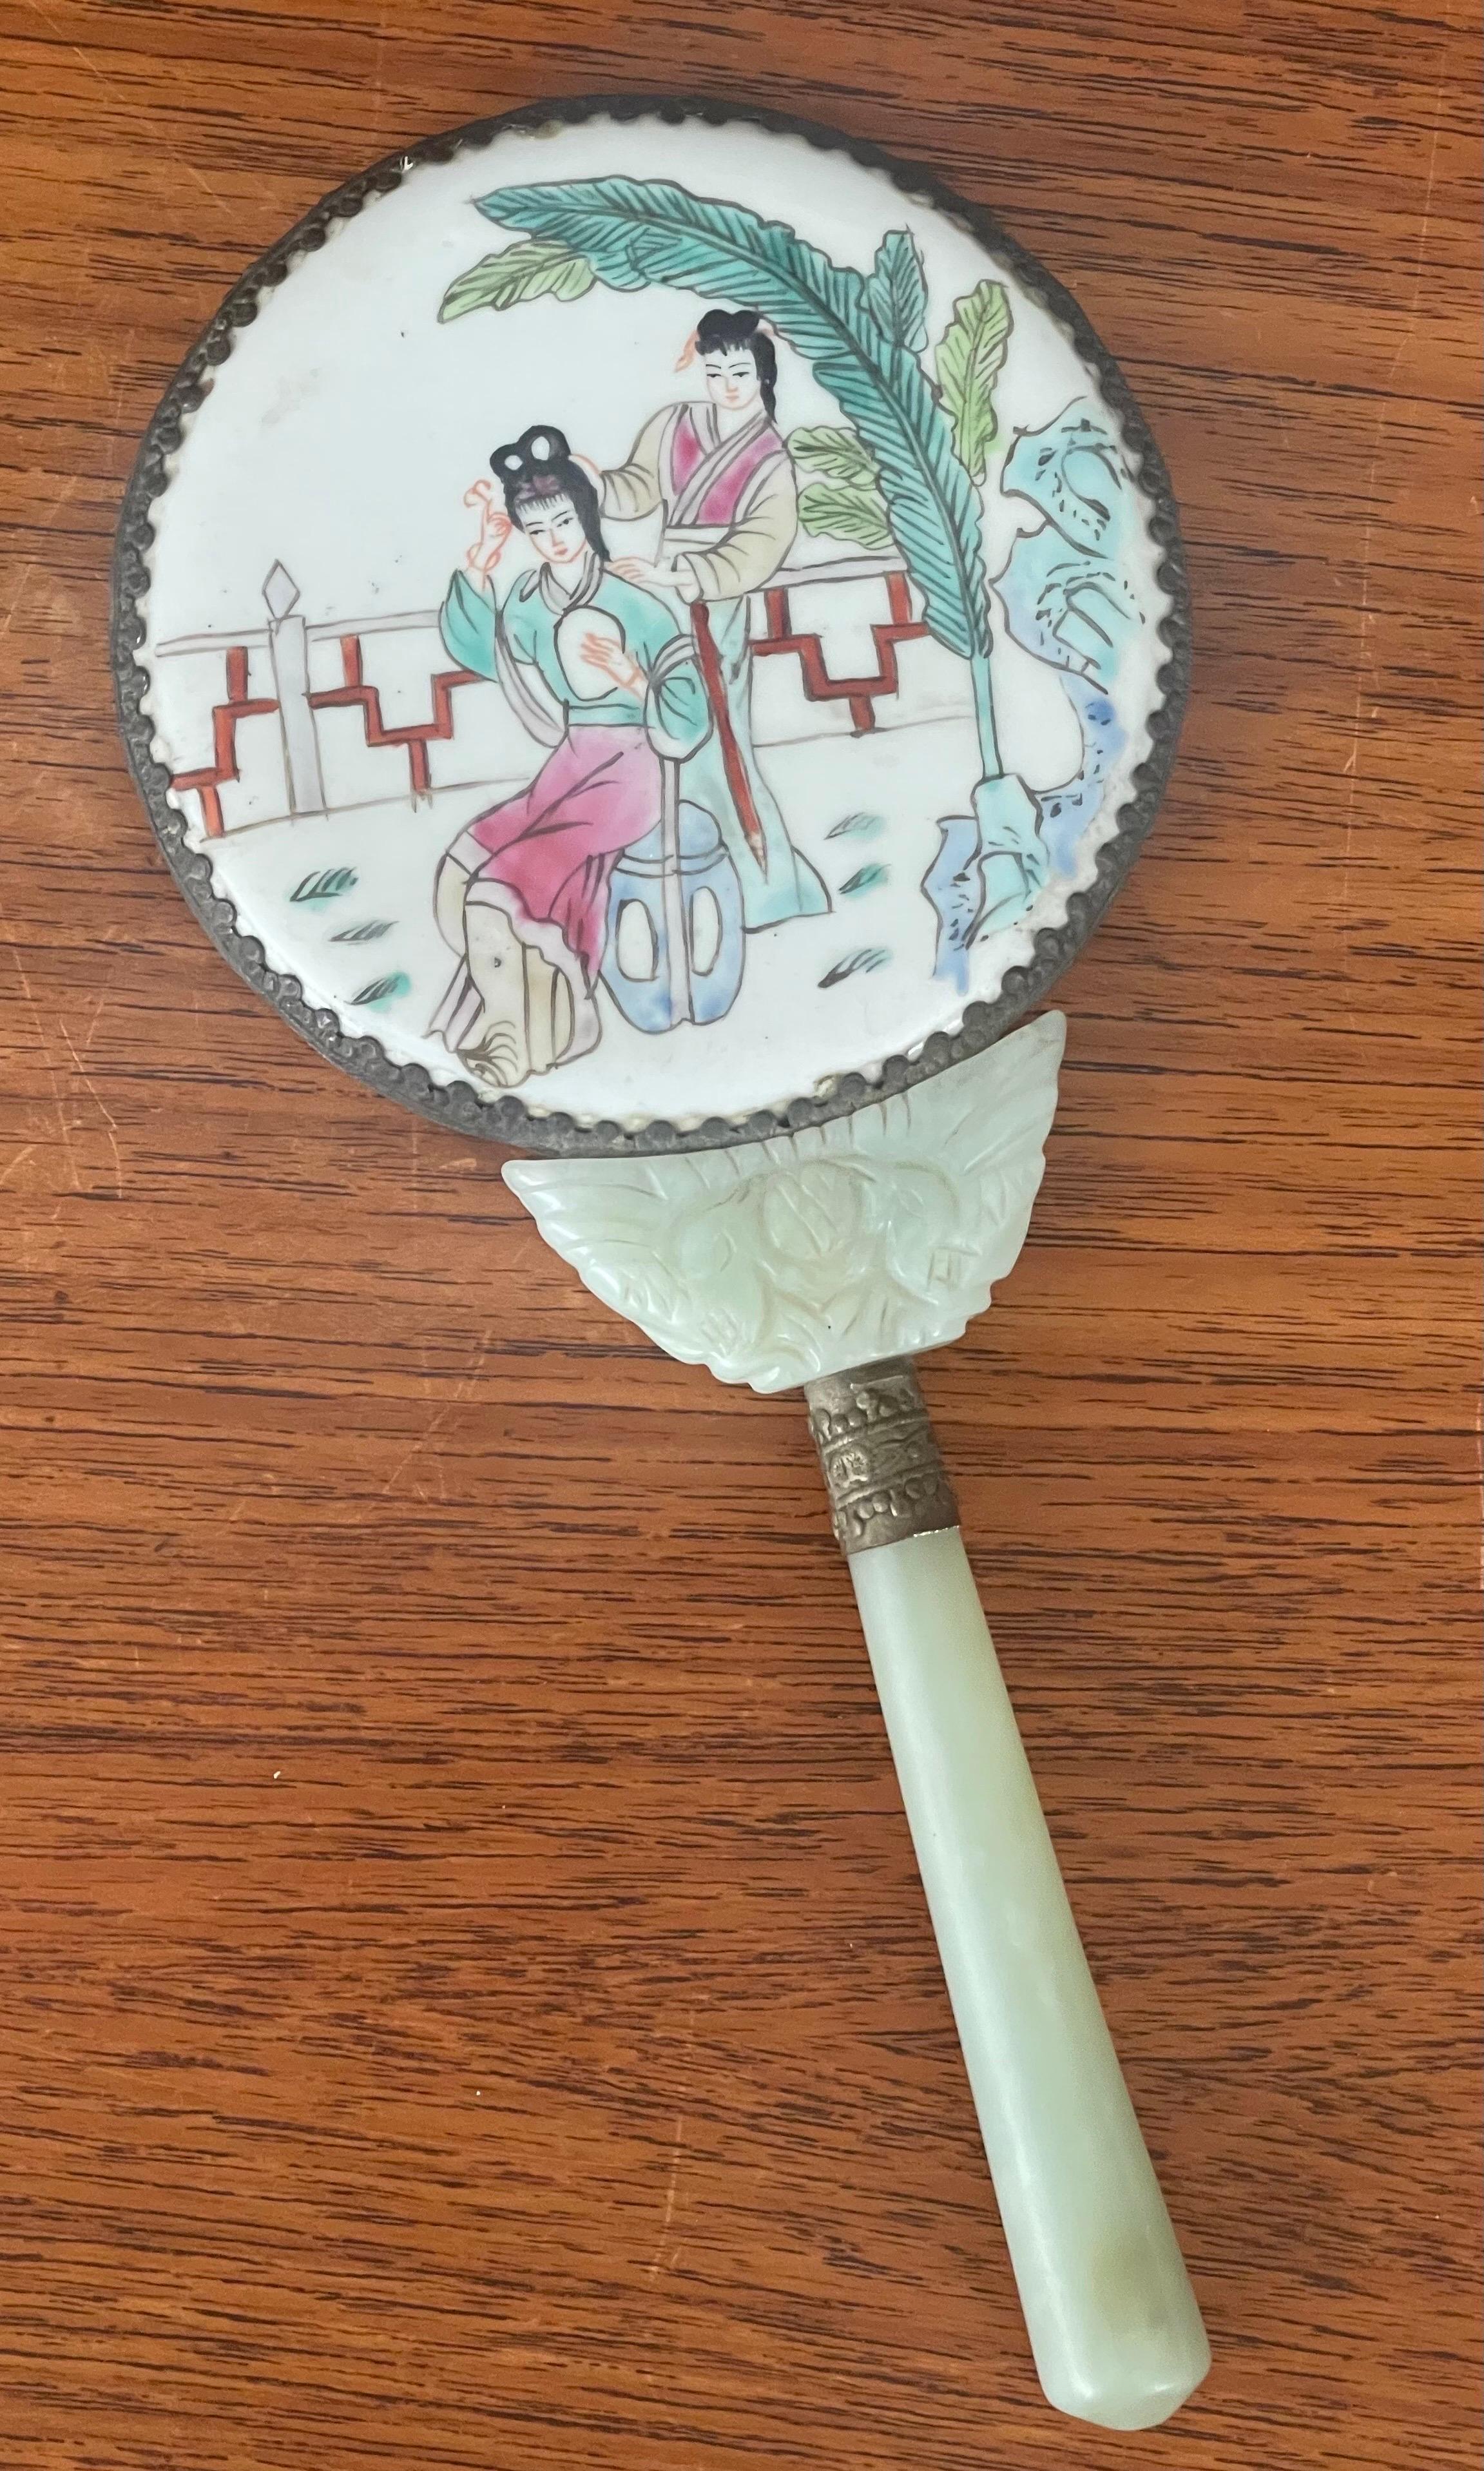 A nice antique Chinese serpentine / jade with hand painted porcelain hand mirror, circa 1910s to 1920s. The mirror is beautifully hand crafted from either serpentine (a stone often mistaken for jade) or jade itself (I am not an expert and honestly